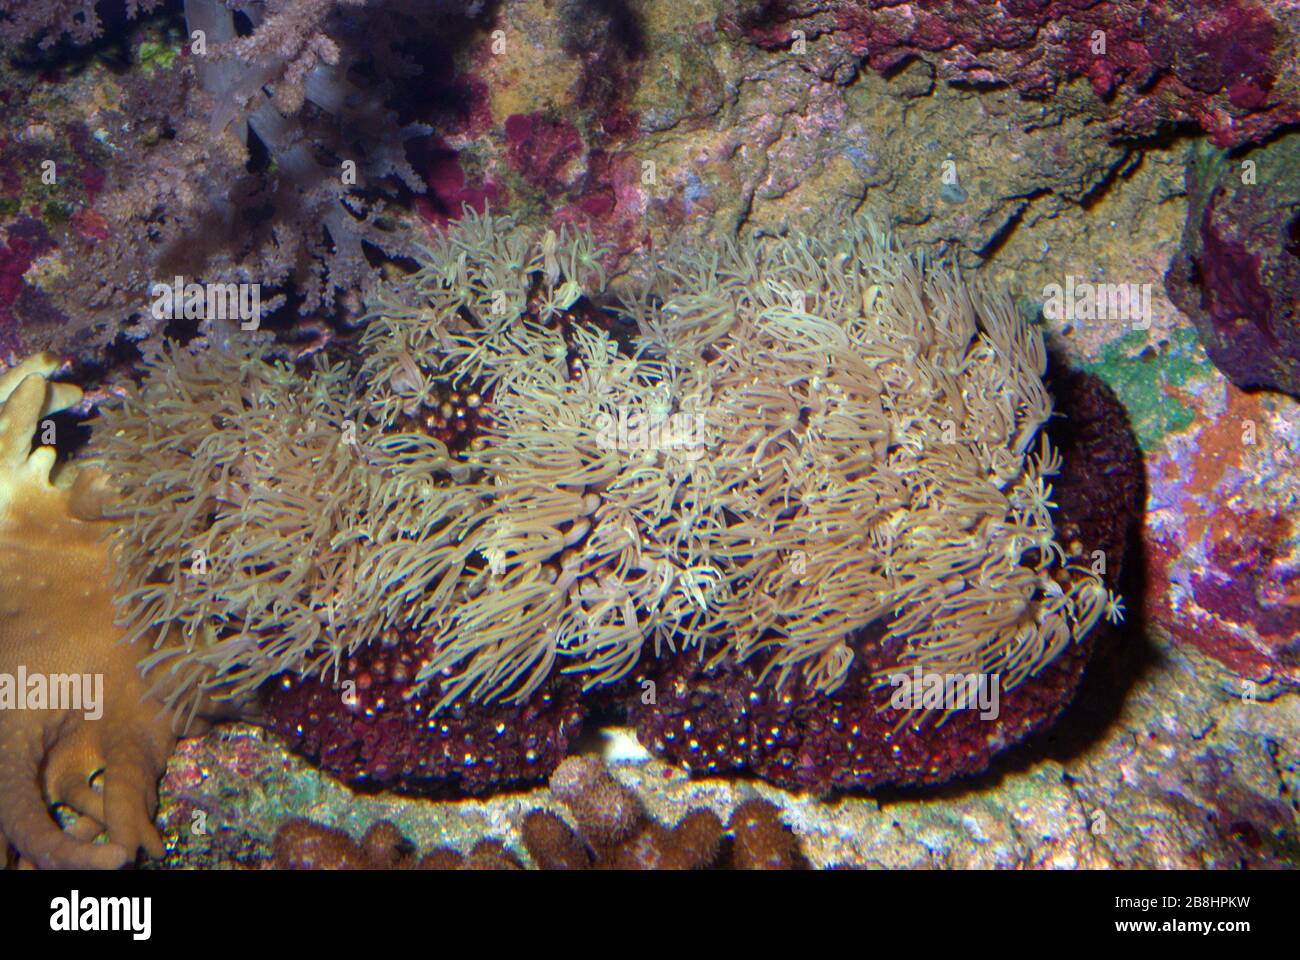 Pulse or Pumping coral, Xenia sp. Stock Photo